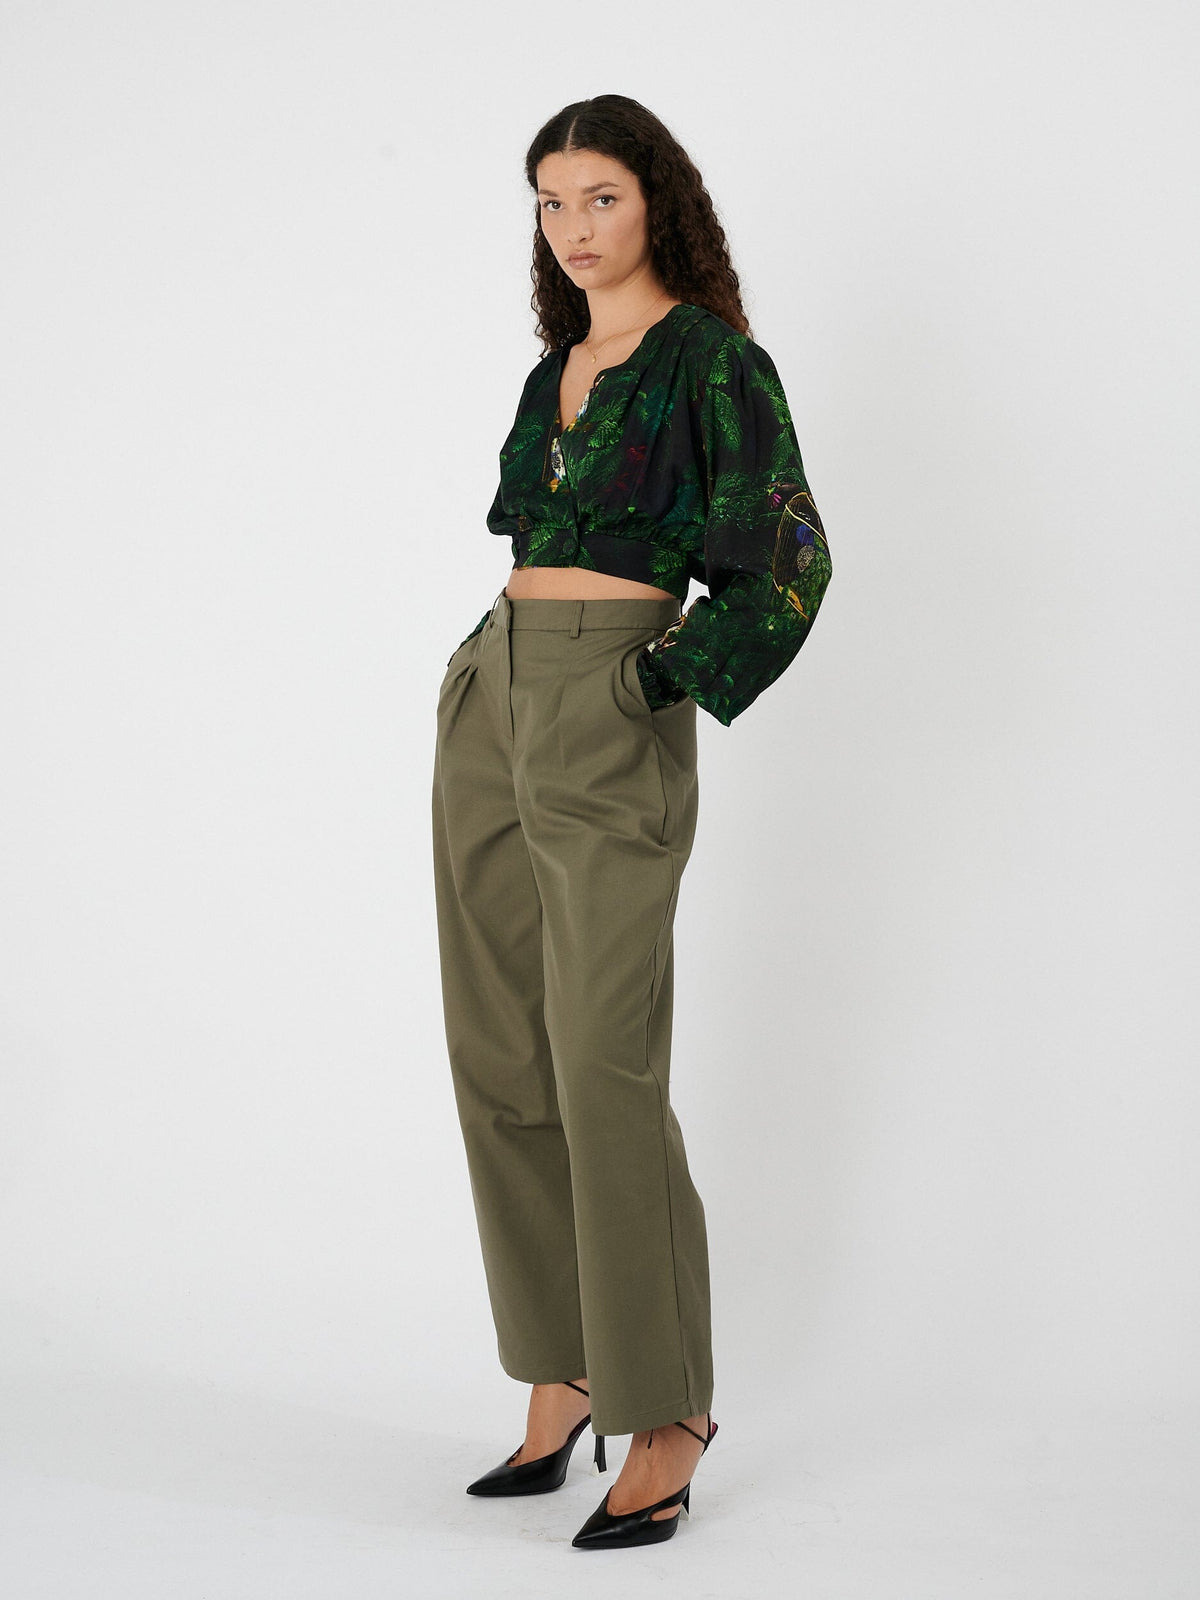 GILBERT - High-waisted pants with darts in Khaki Garbardine Pants Fête Impériale